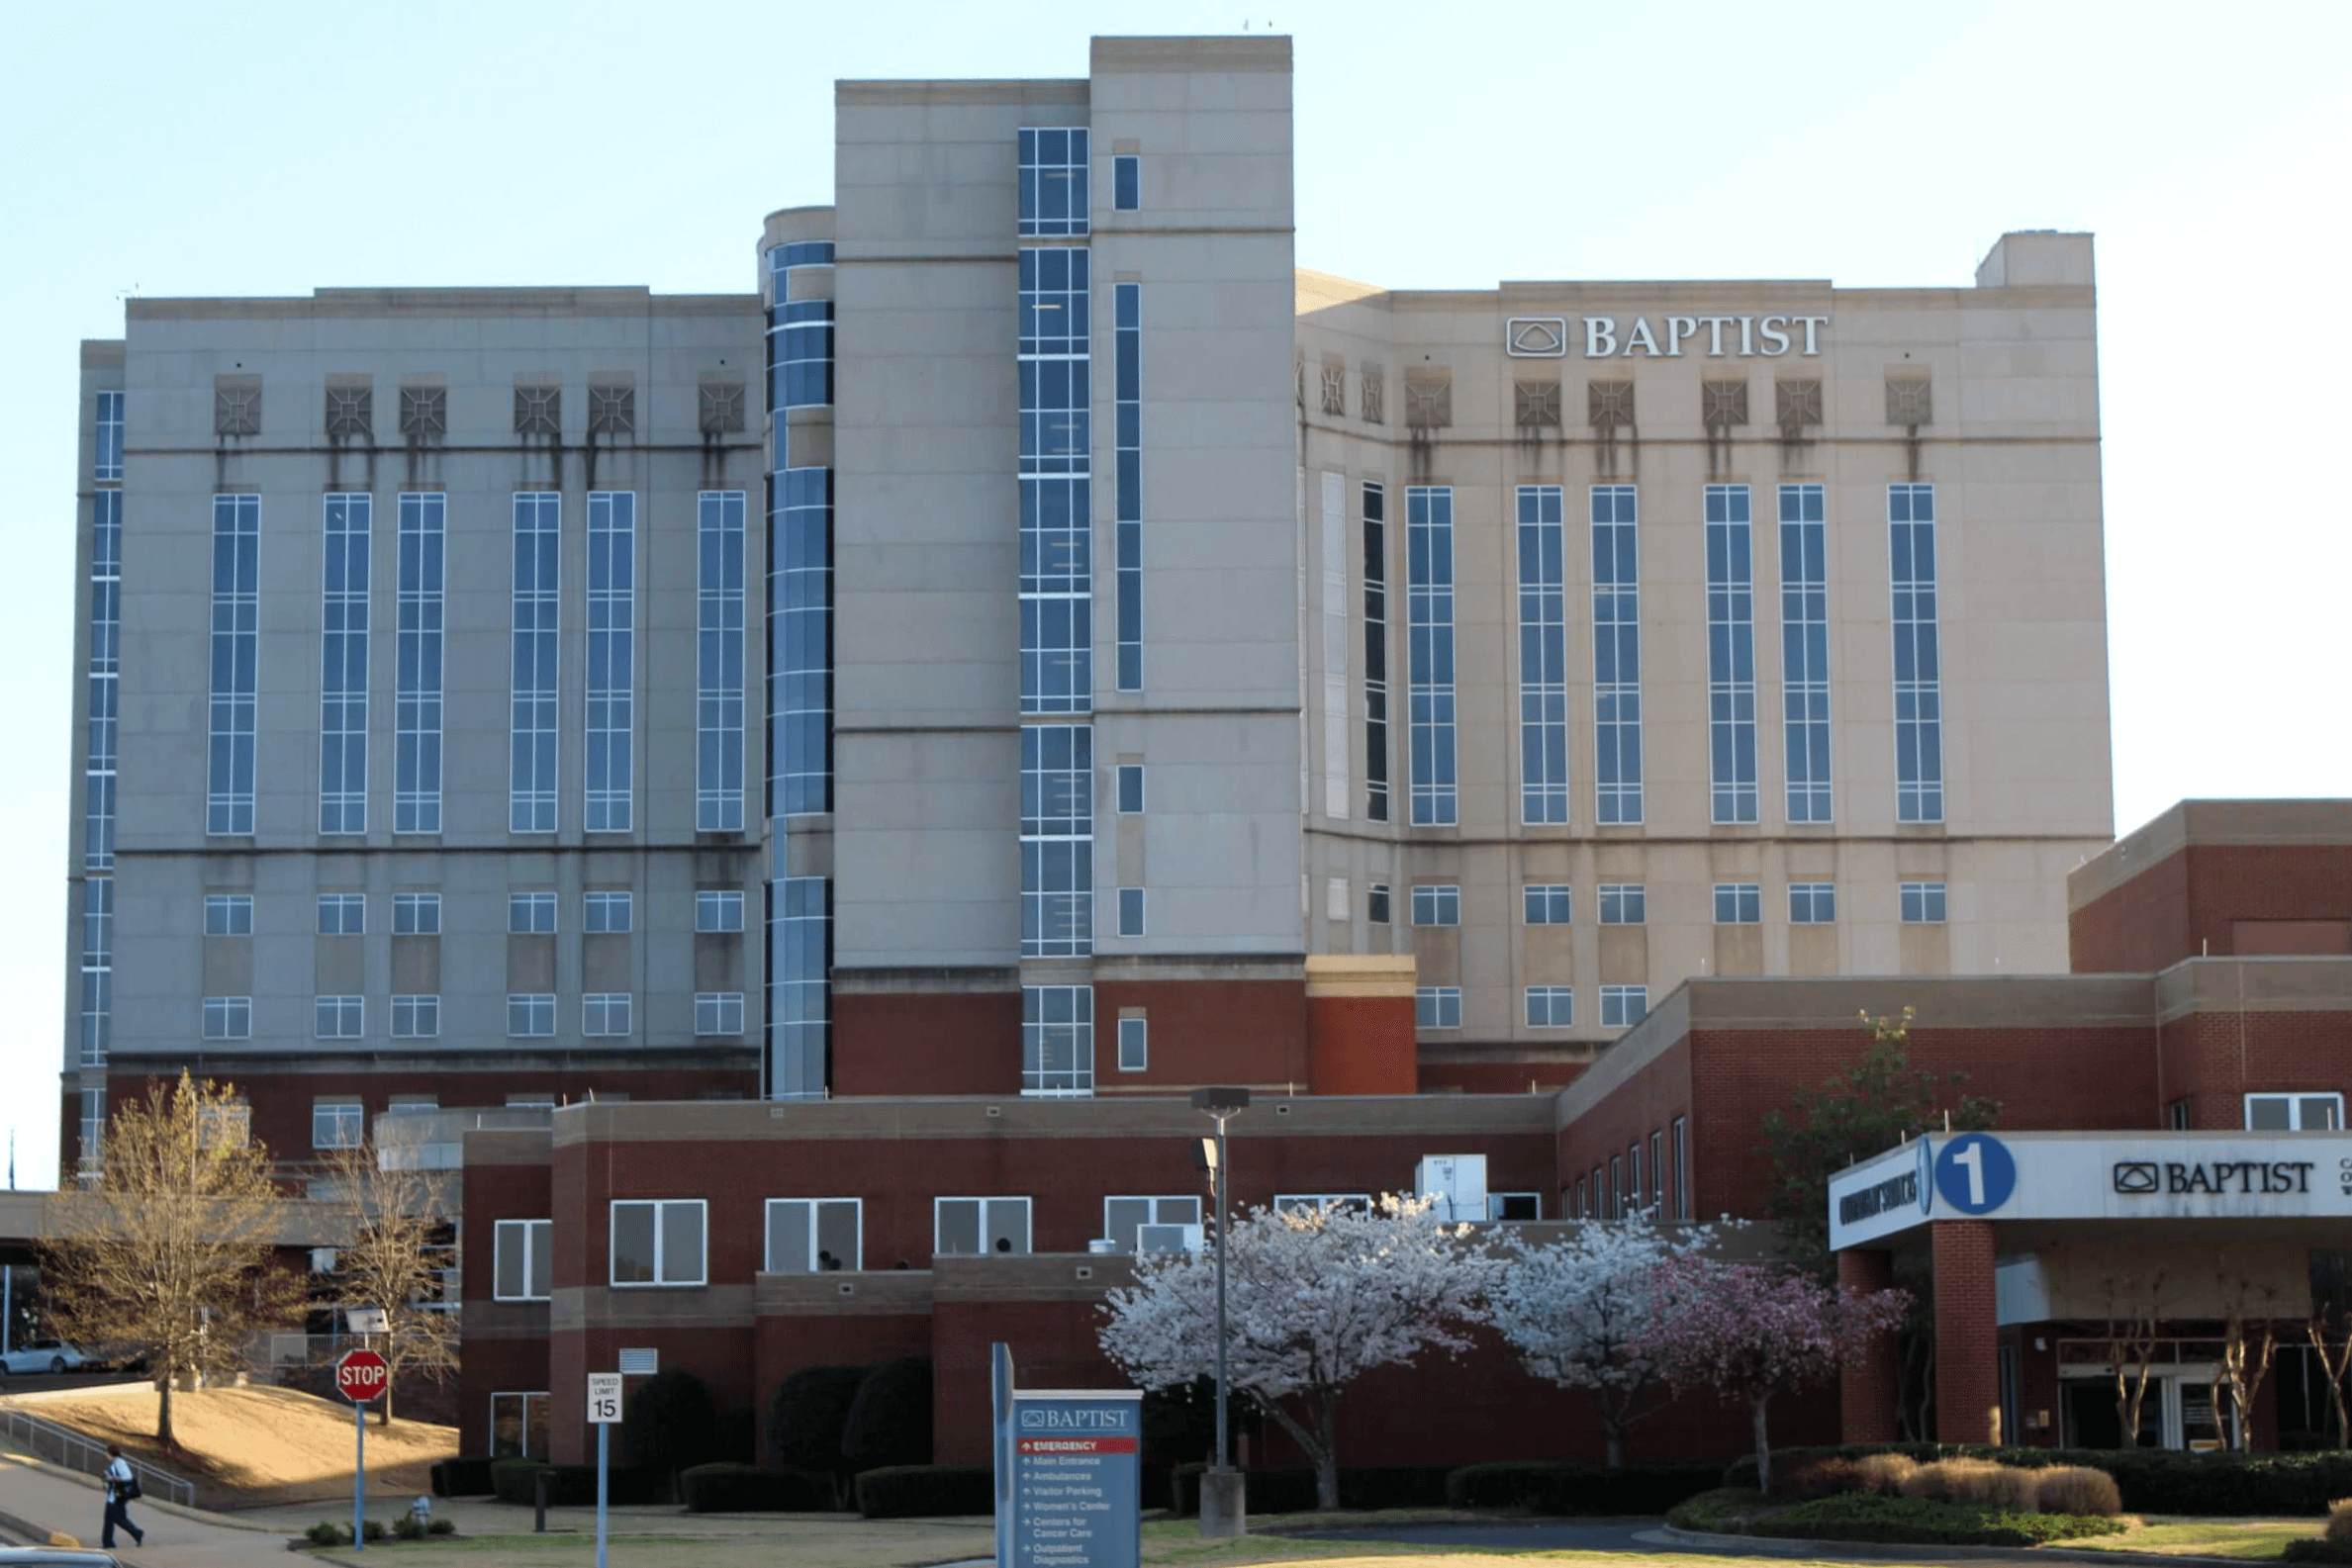 Baptist-DeSoto a high-performing hospital by U.S. News and World Report